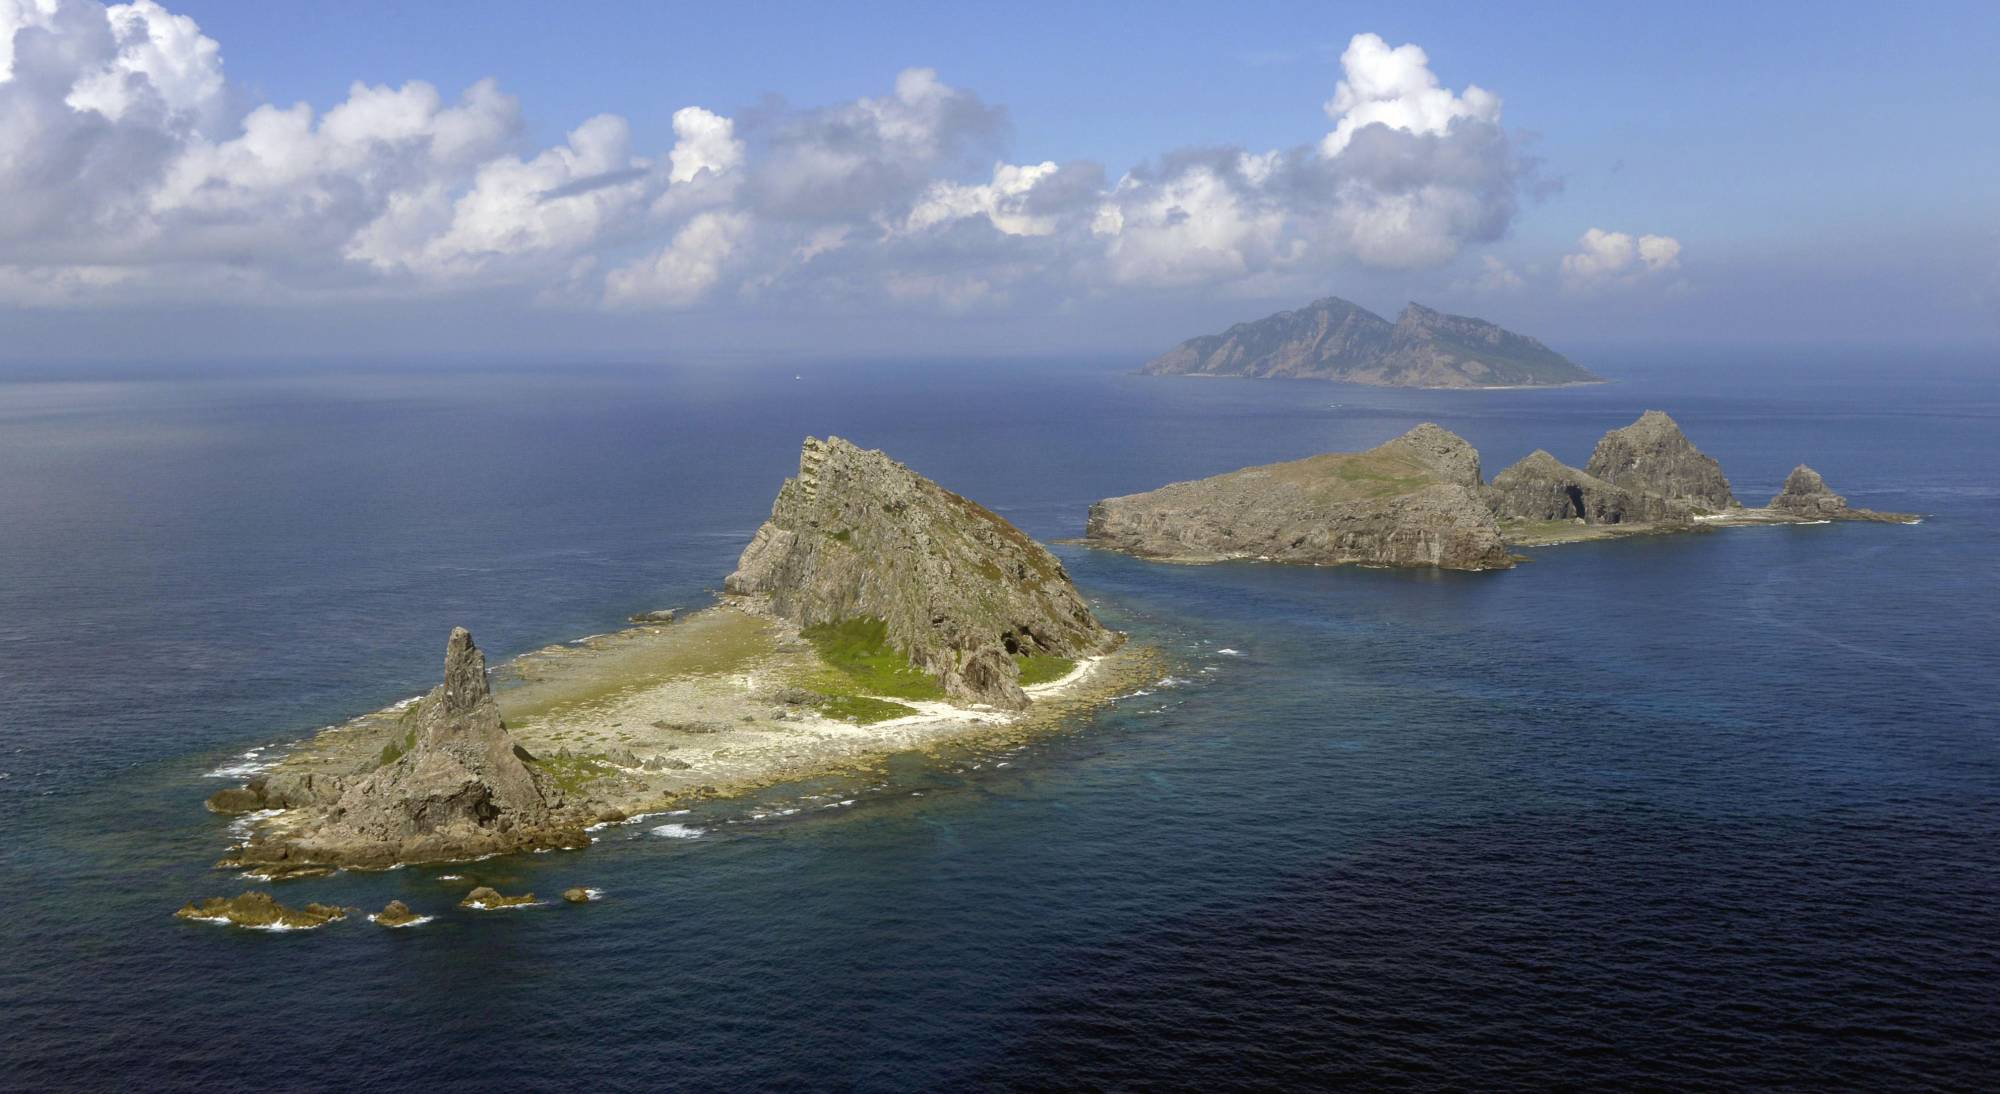 The Chinese military is advancing capabilities for conducting 'gray zone' operations, aggressive acts that fall short of an armed attack, in contested waters, including near the Japanese-controlled Senkaku Islands, the Defense Ministry's think tank has warned. | KYODO